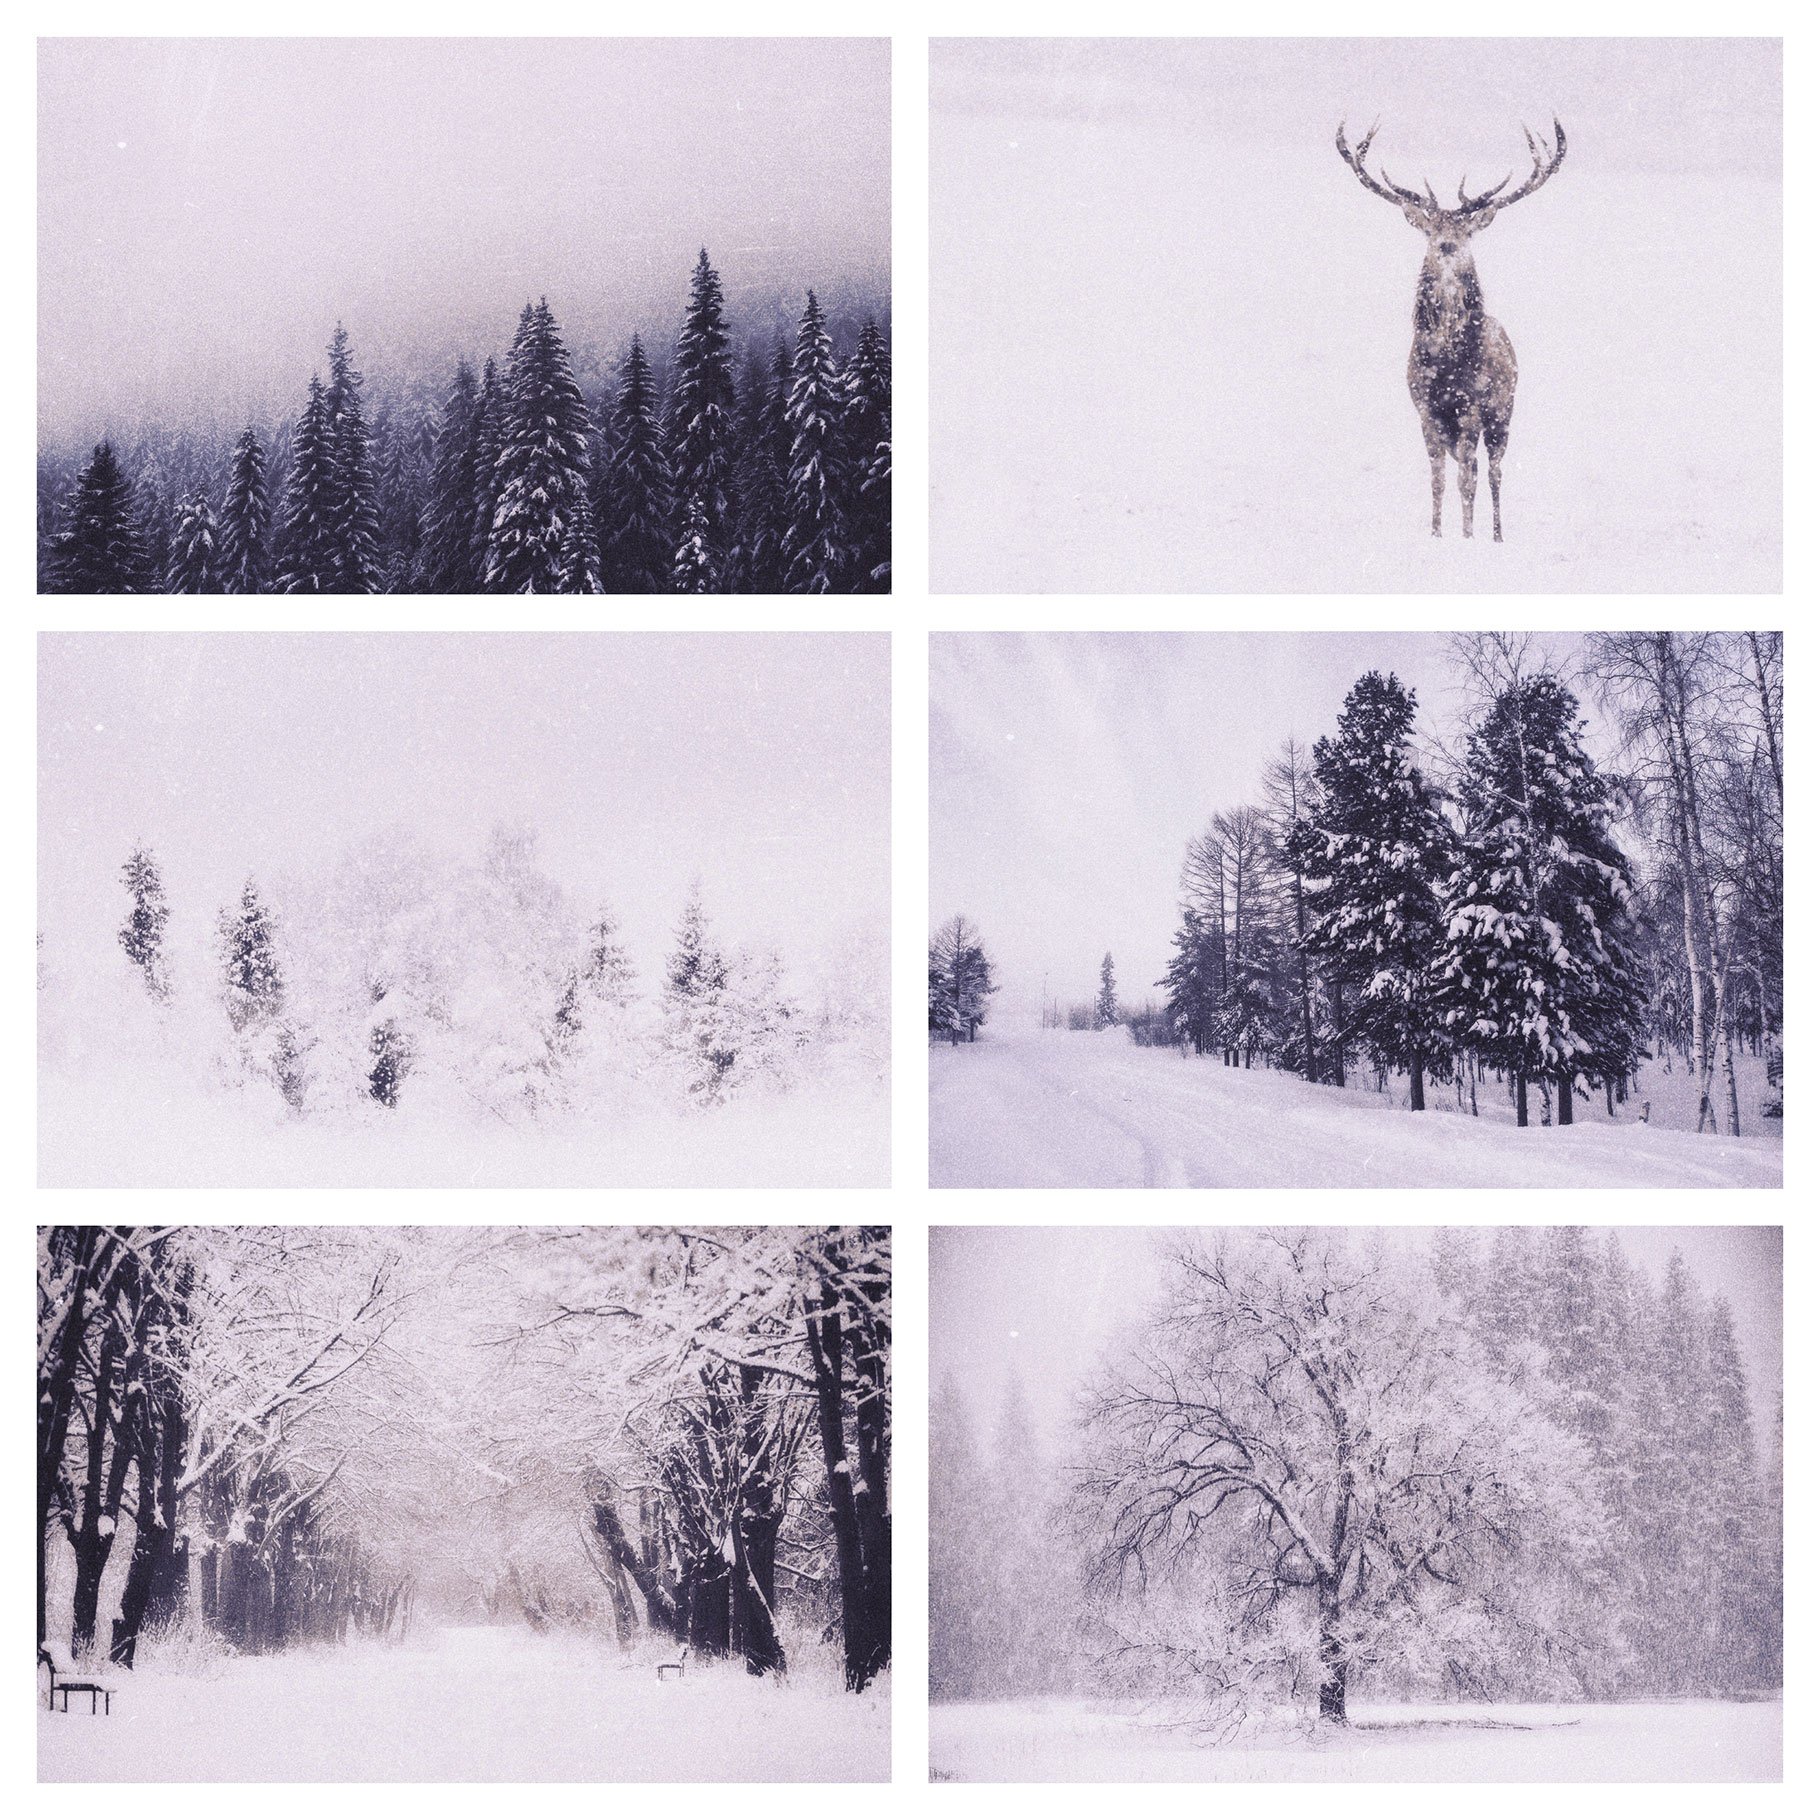 Series of four photographs of a deer in the snow.